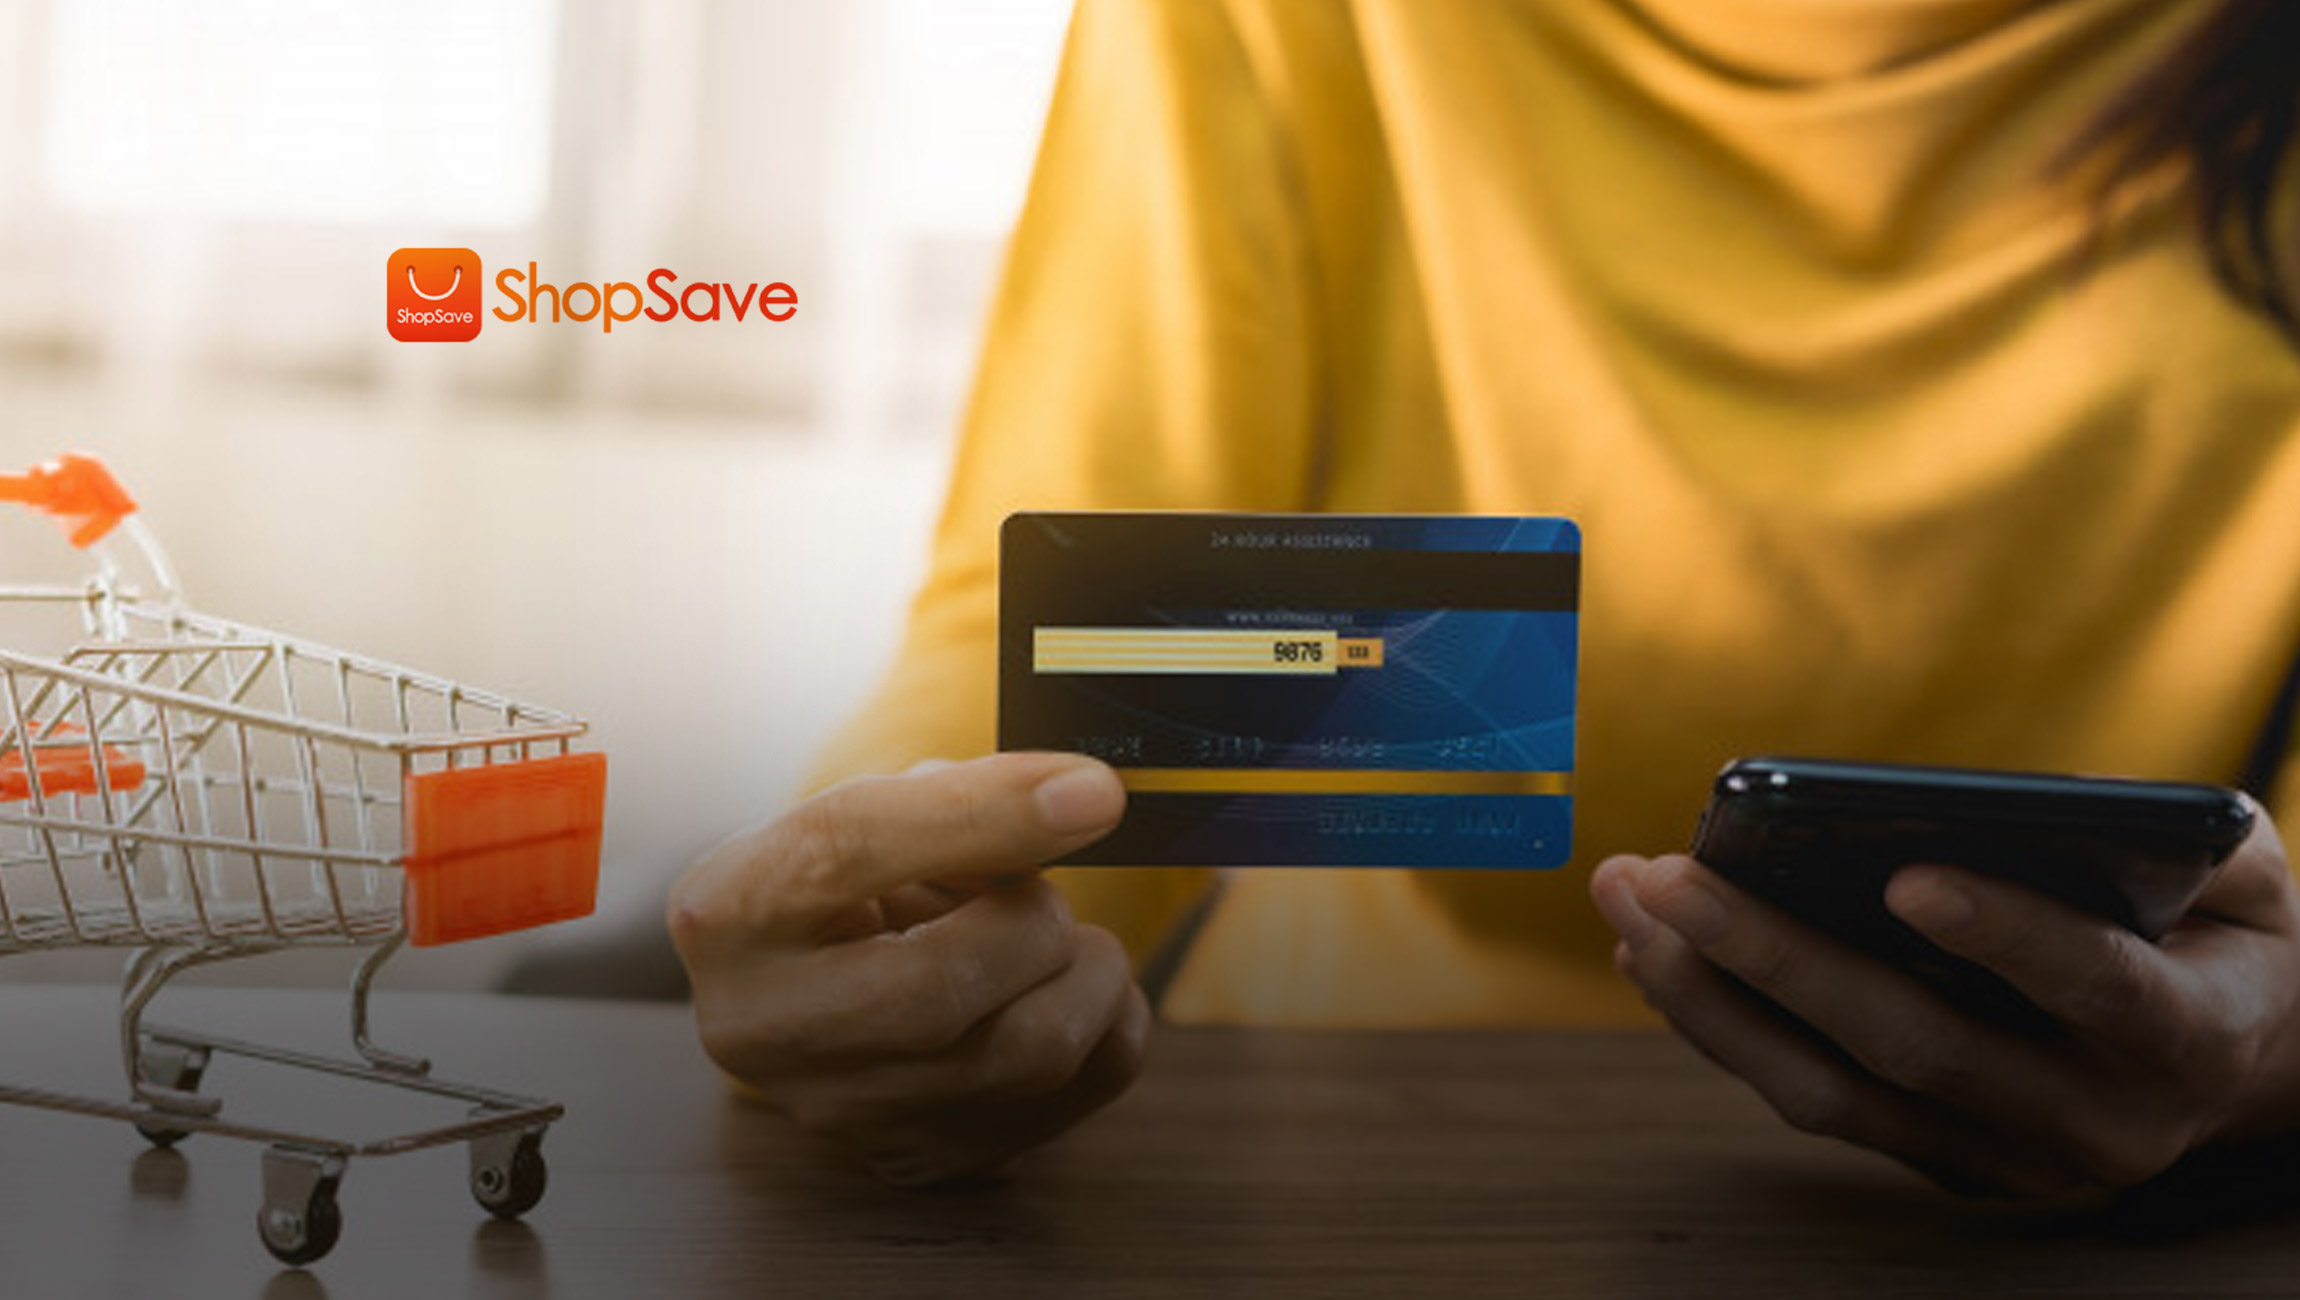 ShopSave--to Build "Buy to Save, Share to Earn" Social E-commerce Cashback Platform